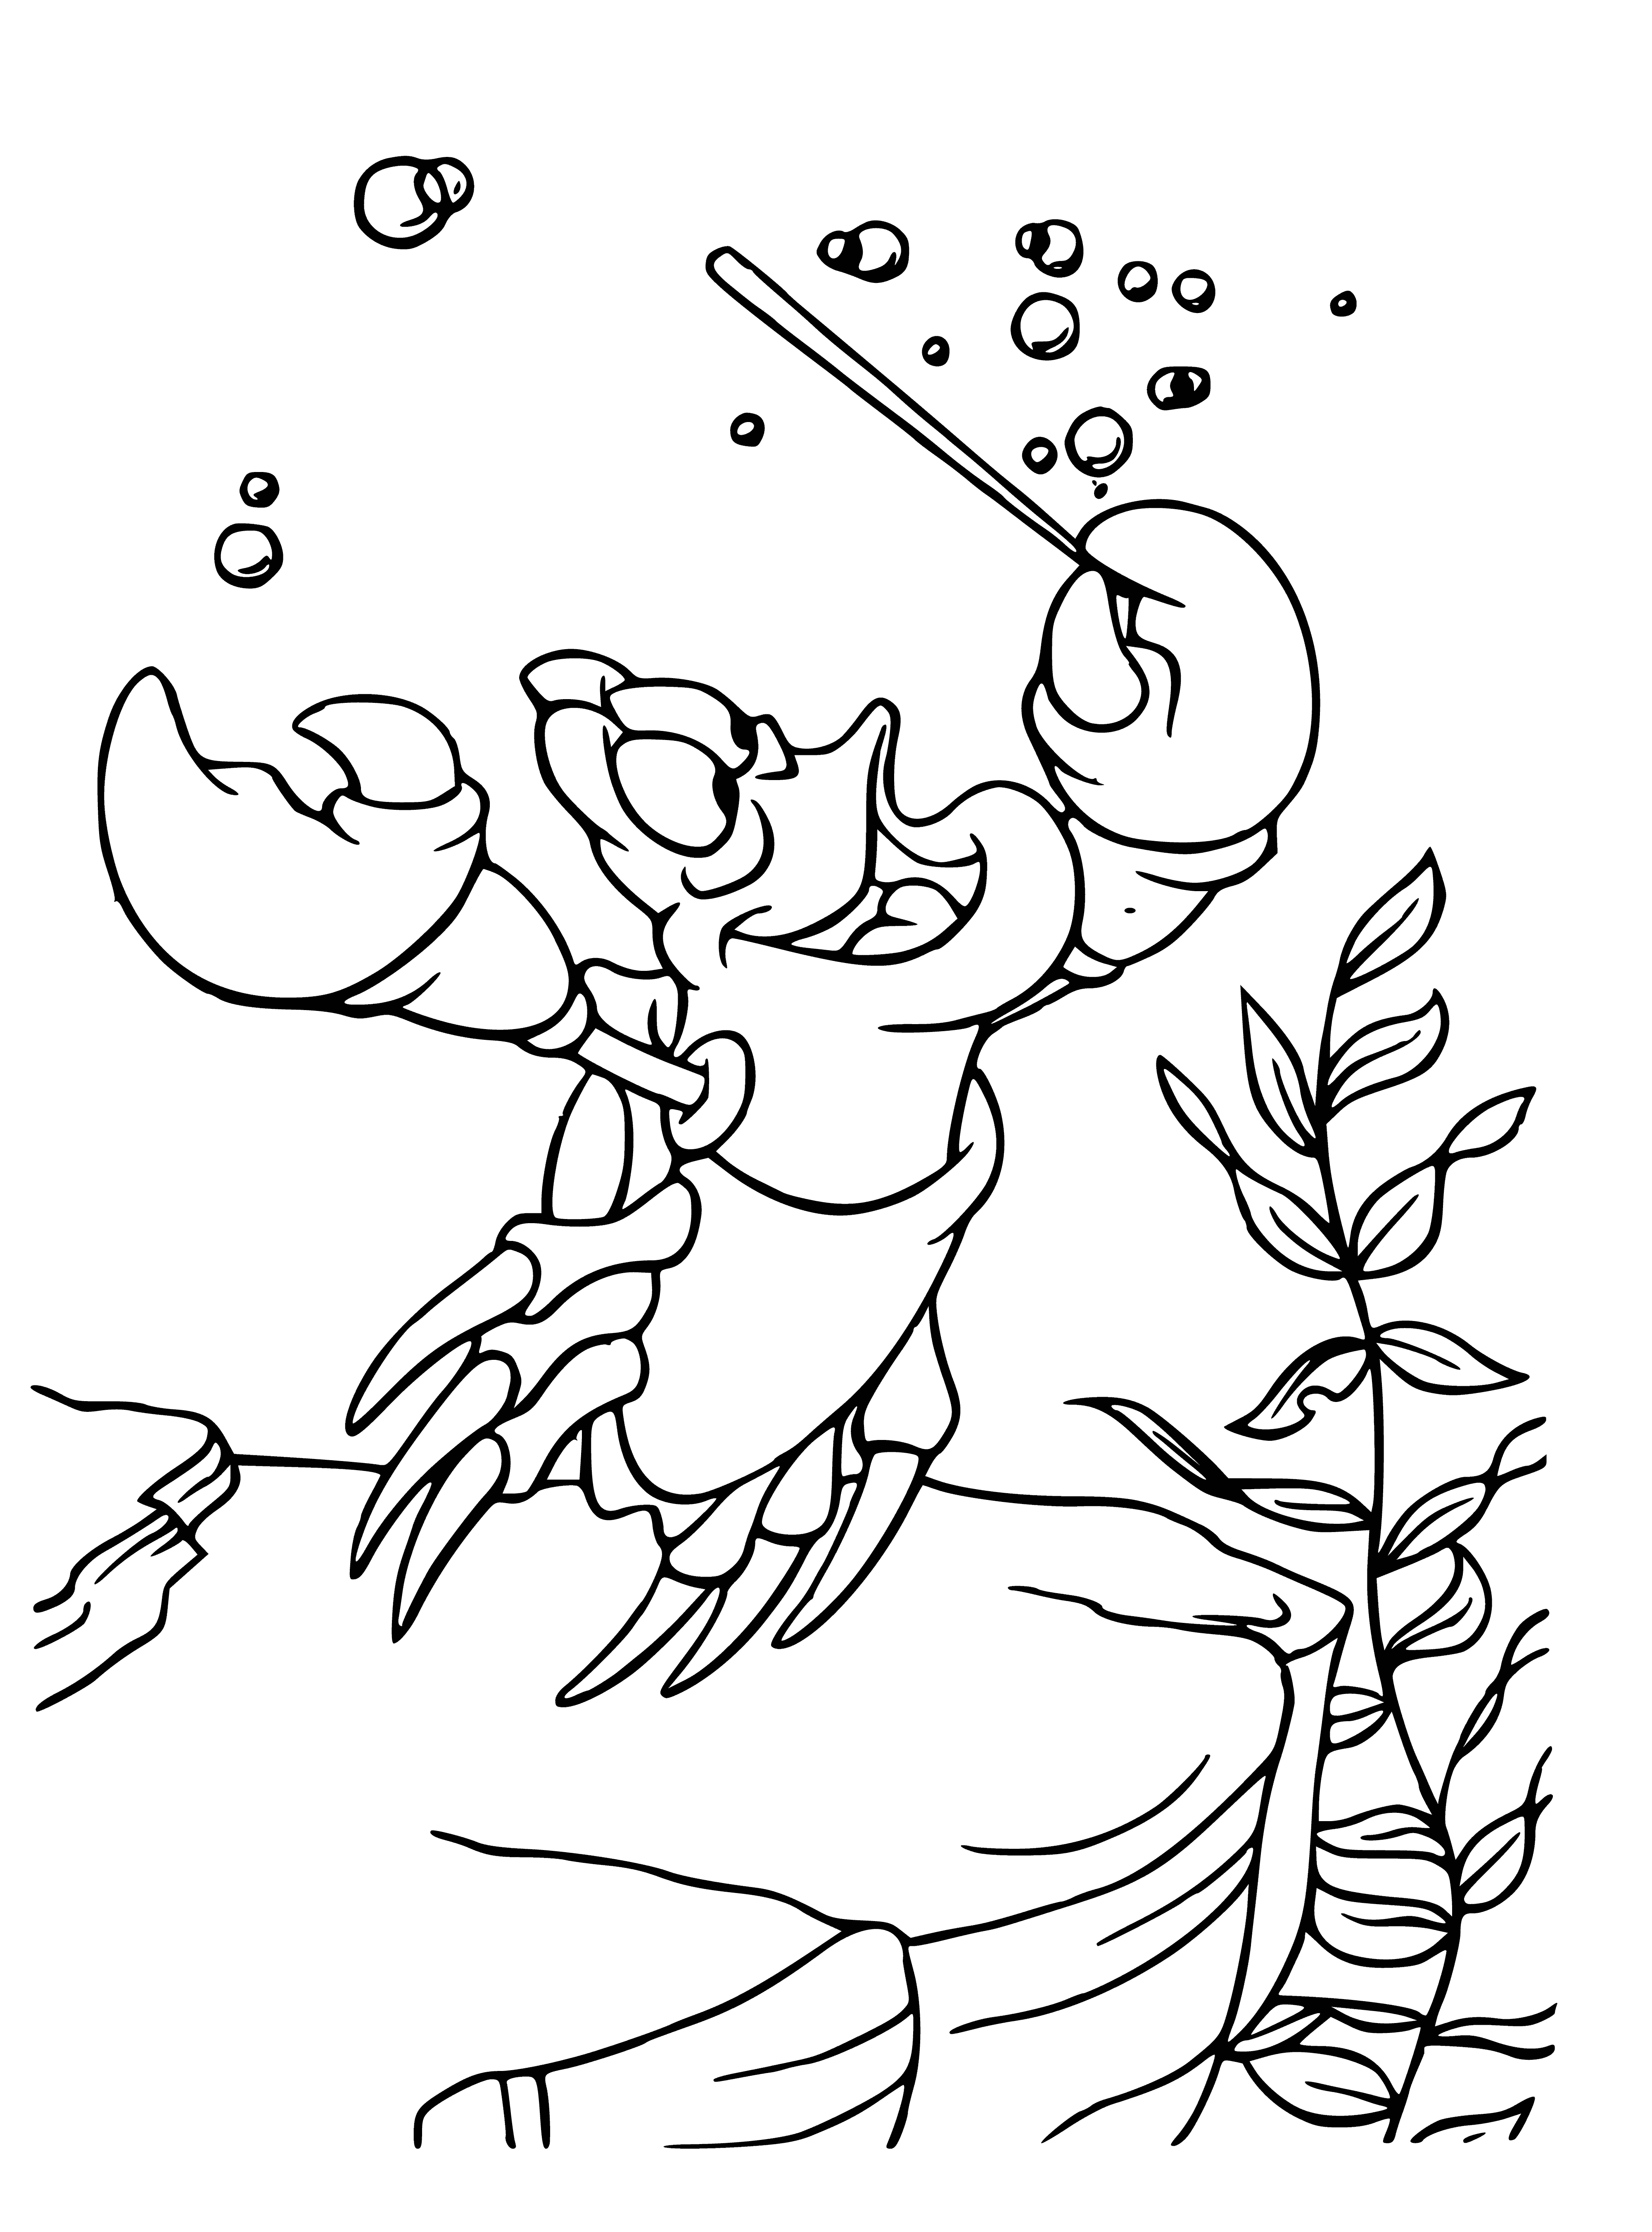 coloring page: Ariel is leading an orchestra of sea creatures, with Sebastian the crab at the helm.